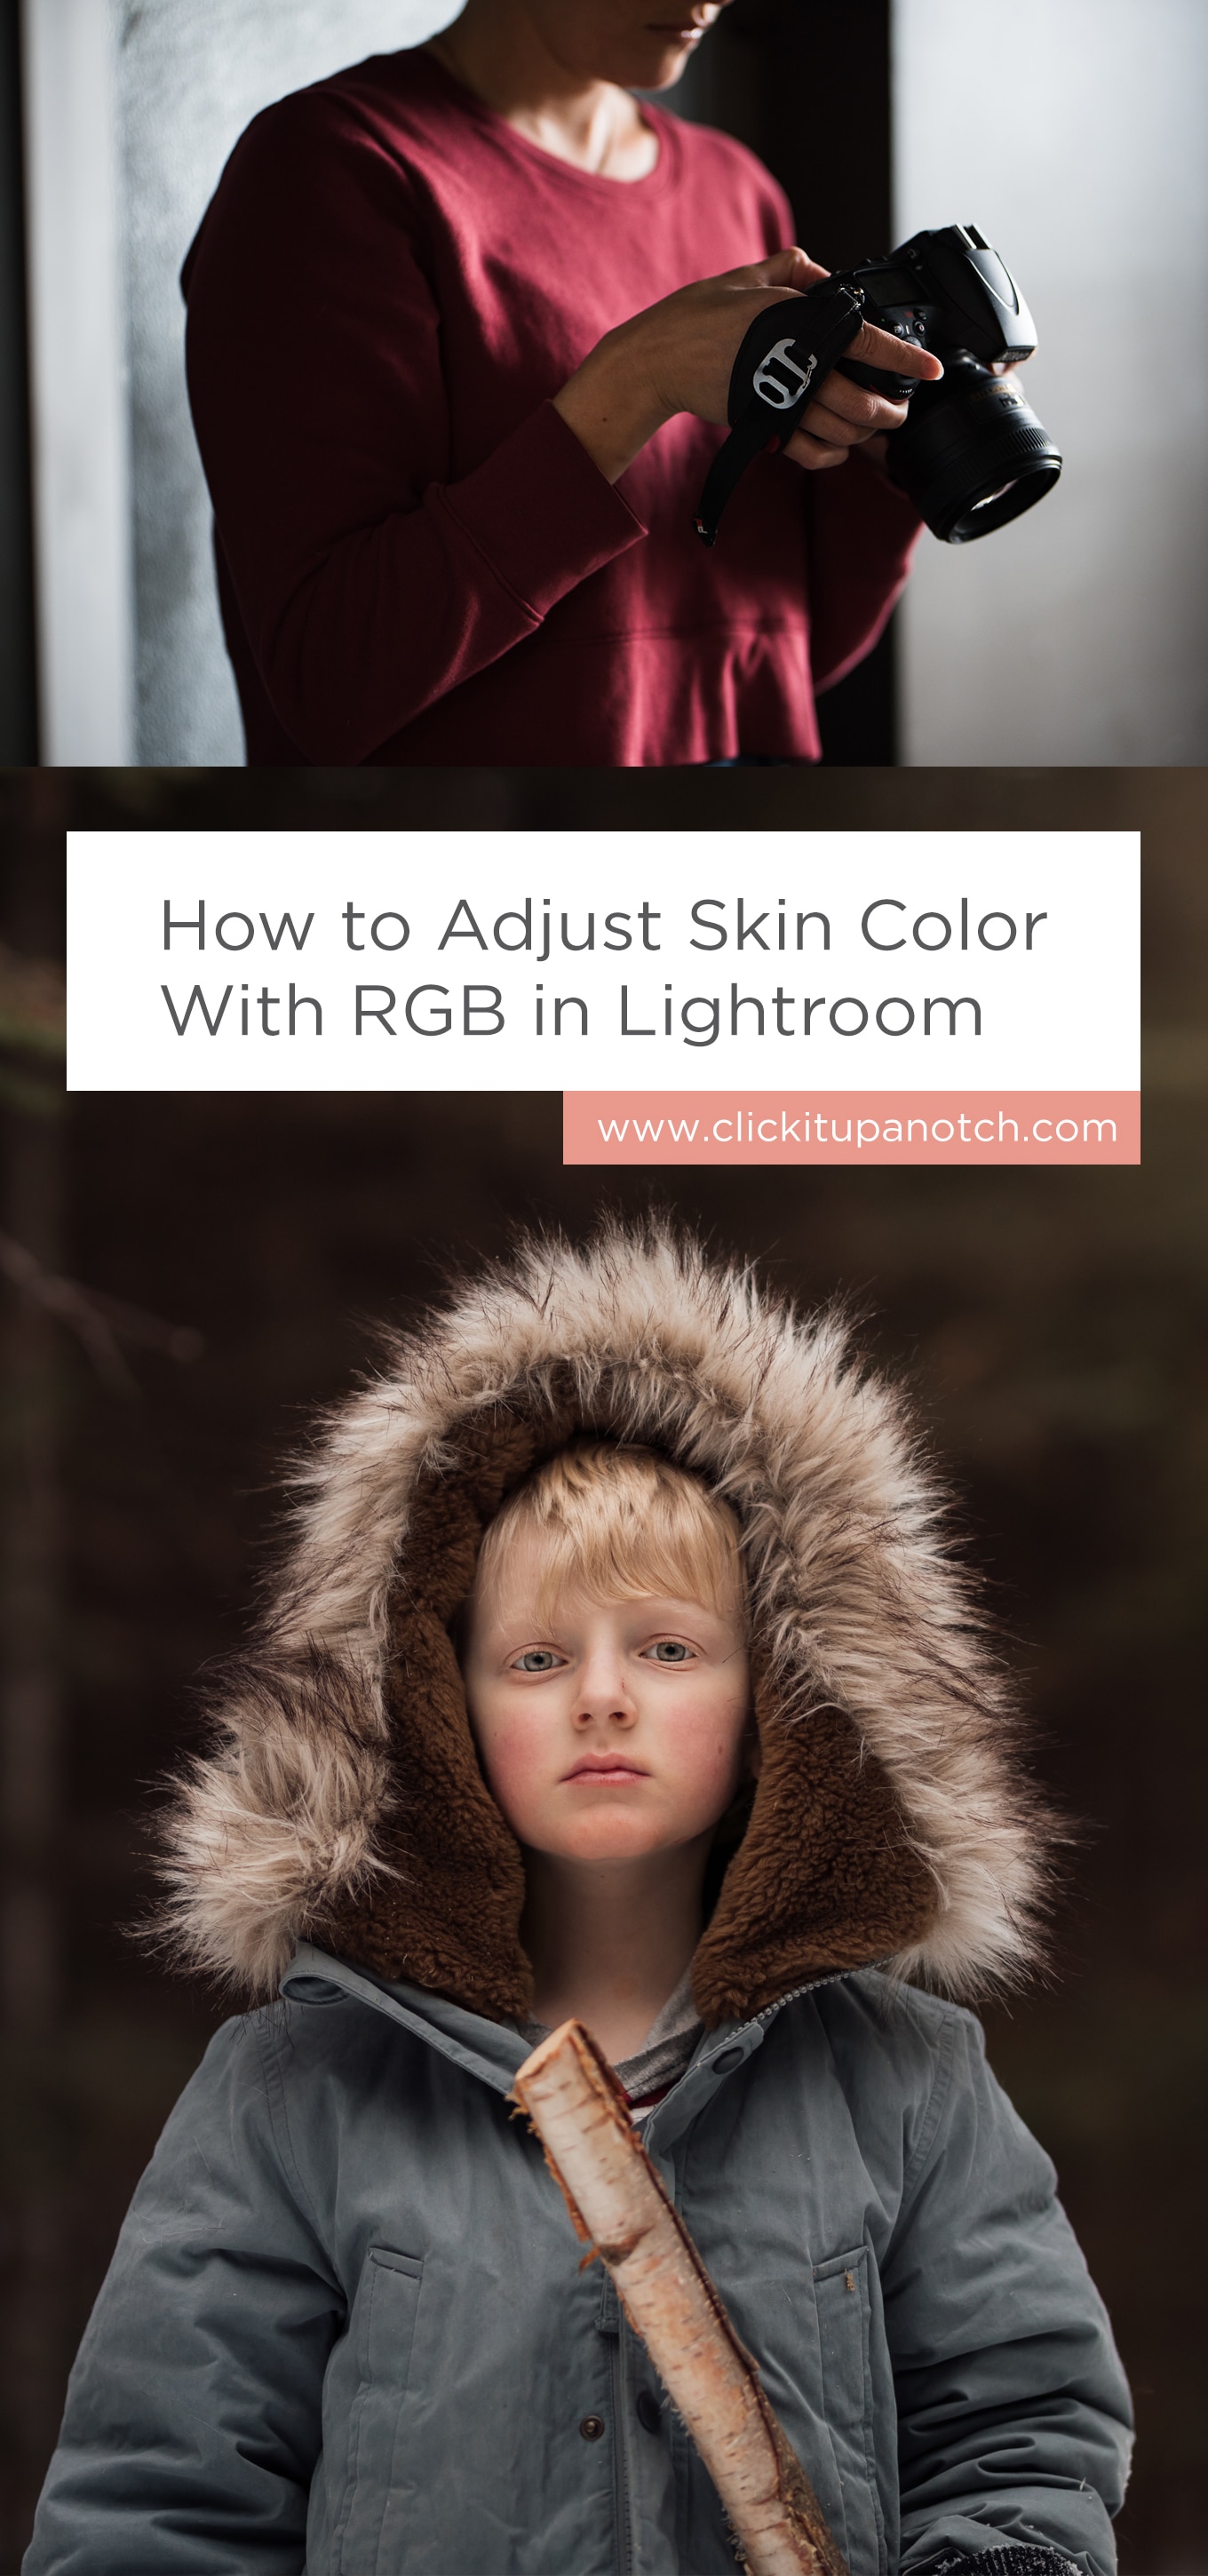 This has RGB numbers and tells you how to correct skin tones in camera and in Light room. Must Read - "How to Adjust Skin Color with RGB in Lightroom"